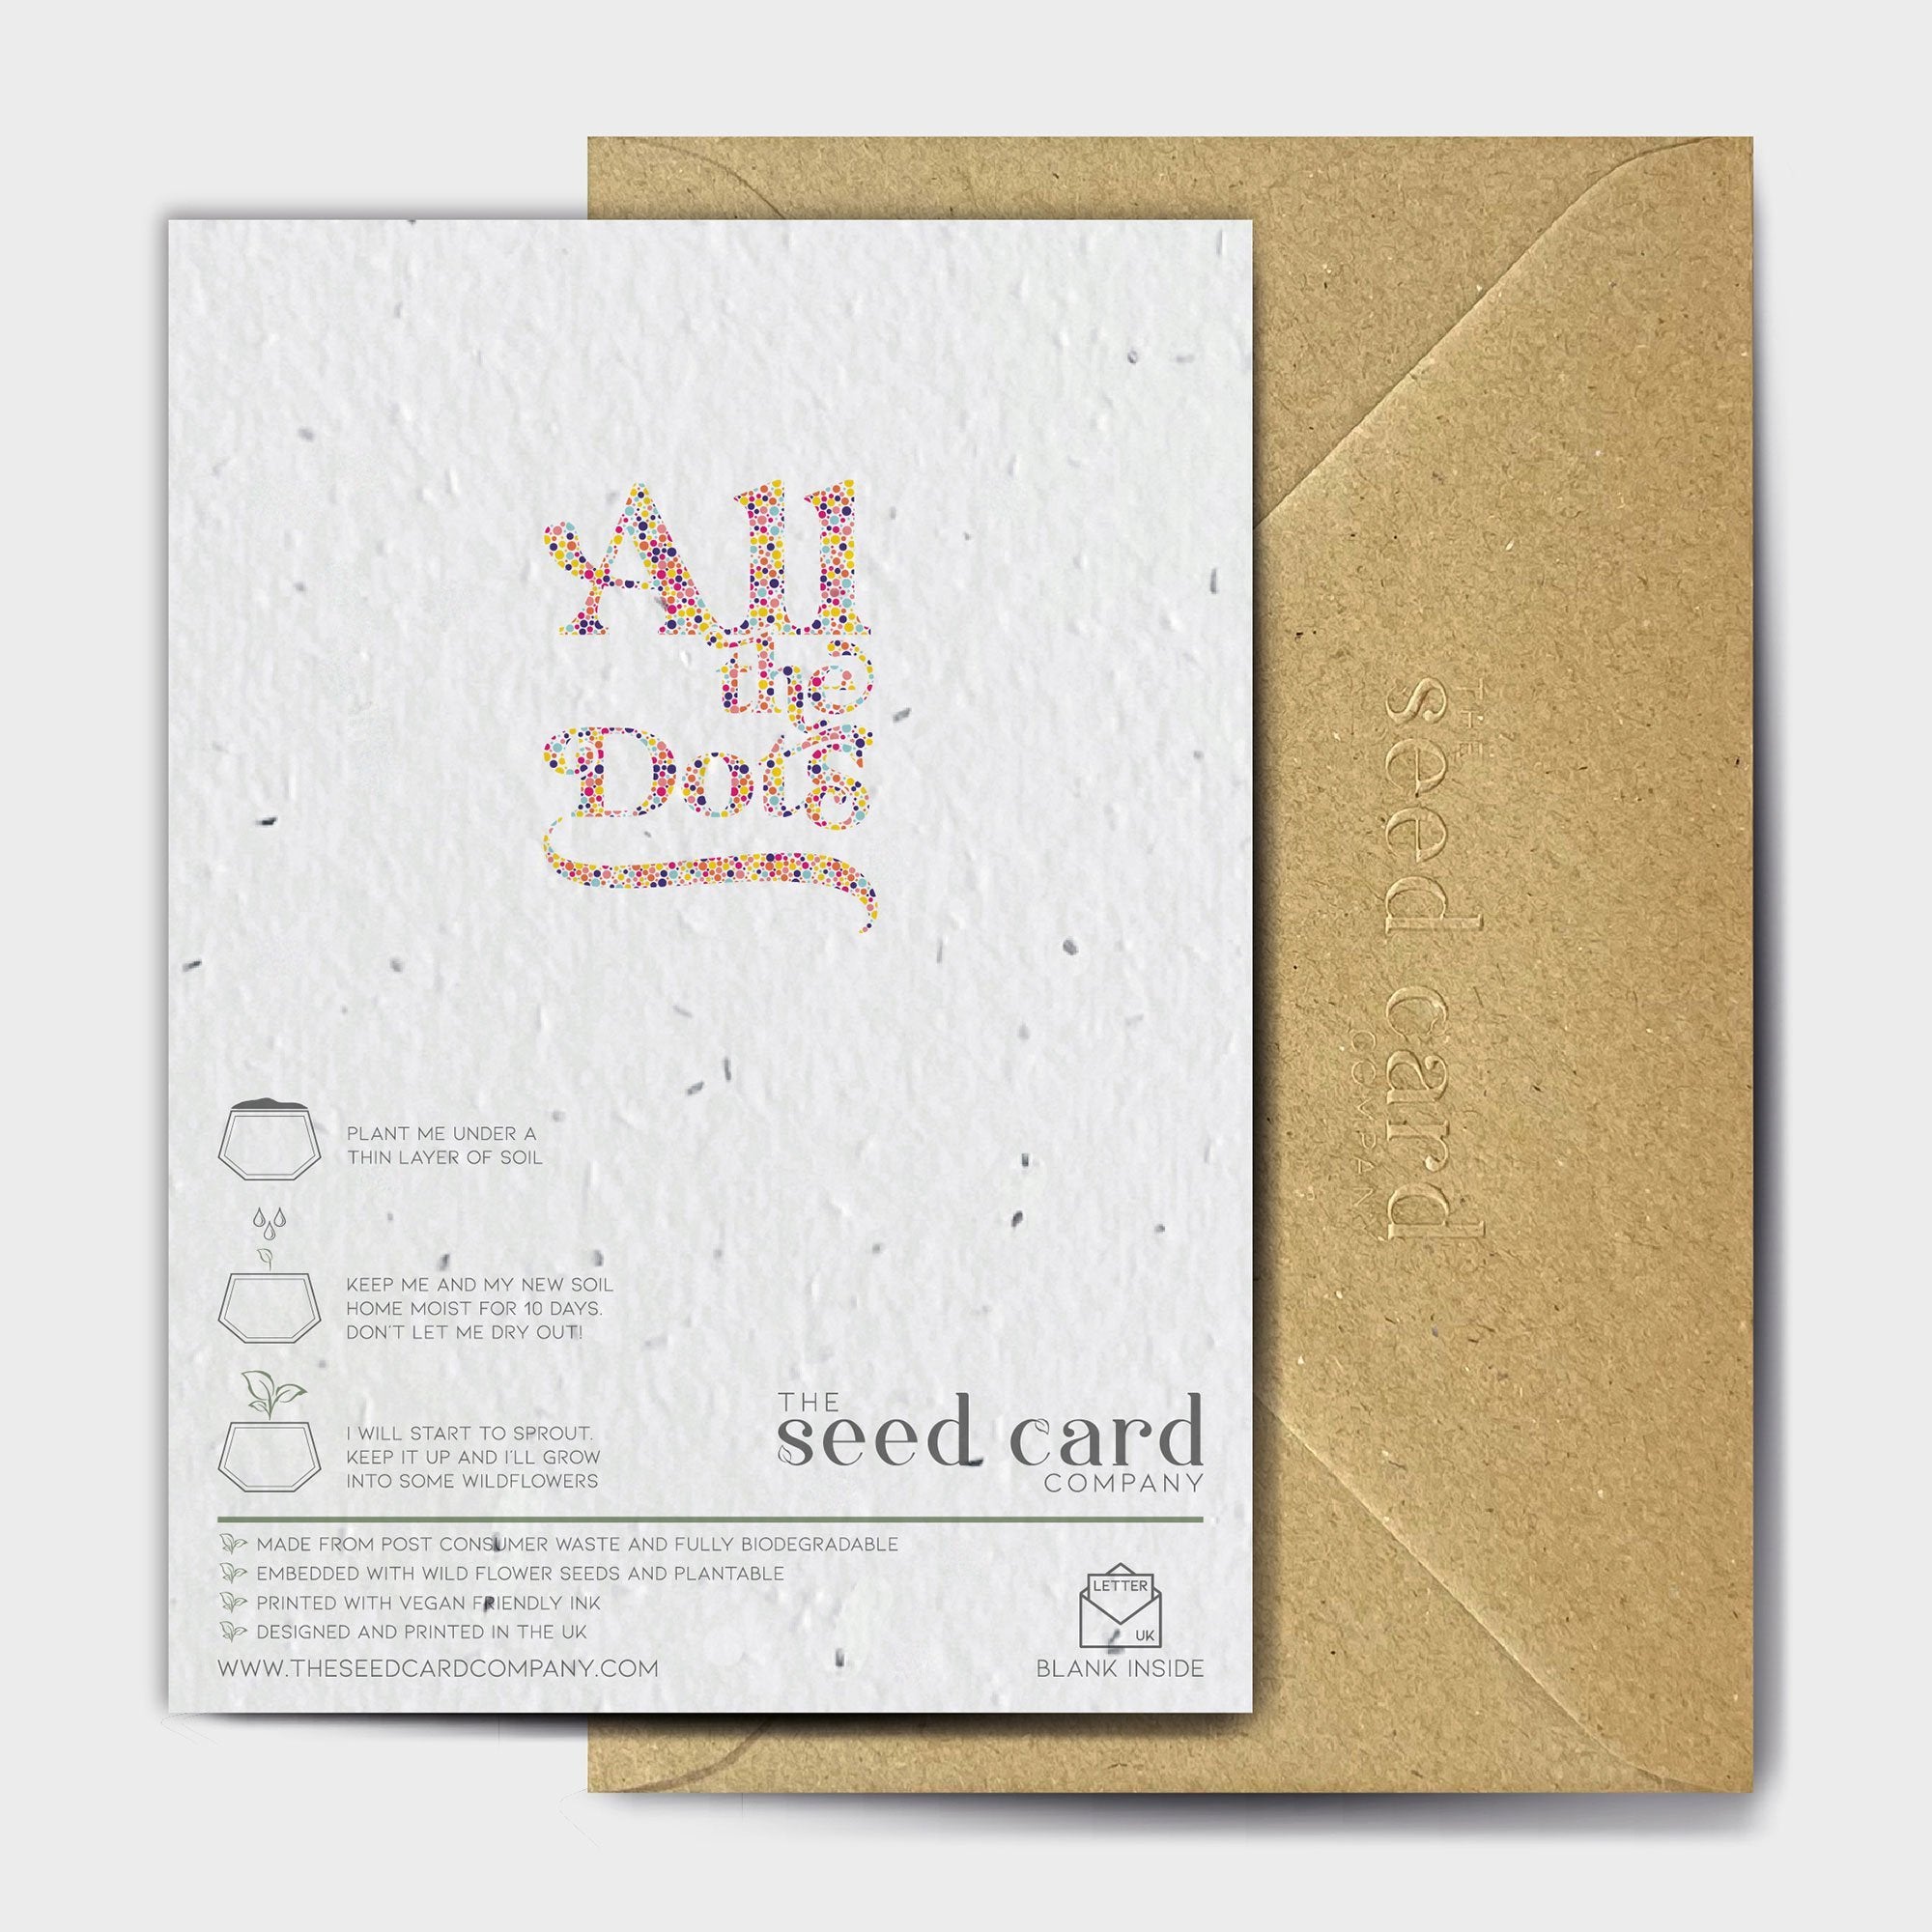 Shop online Dotty Sixty - 100% biodegradable seed-embedded cards Shop -The Seed Card Company